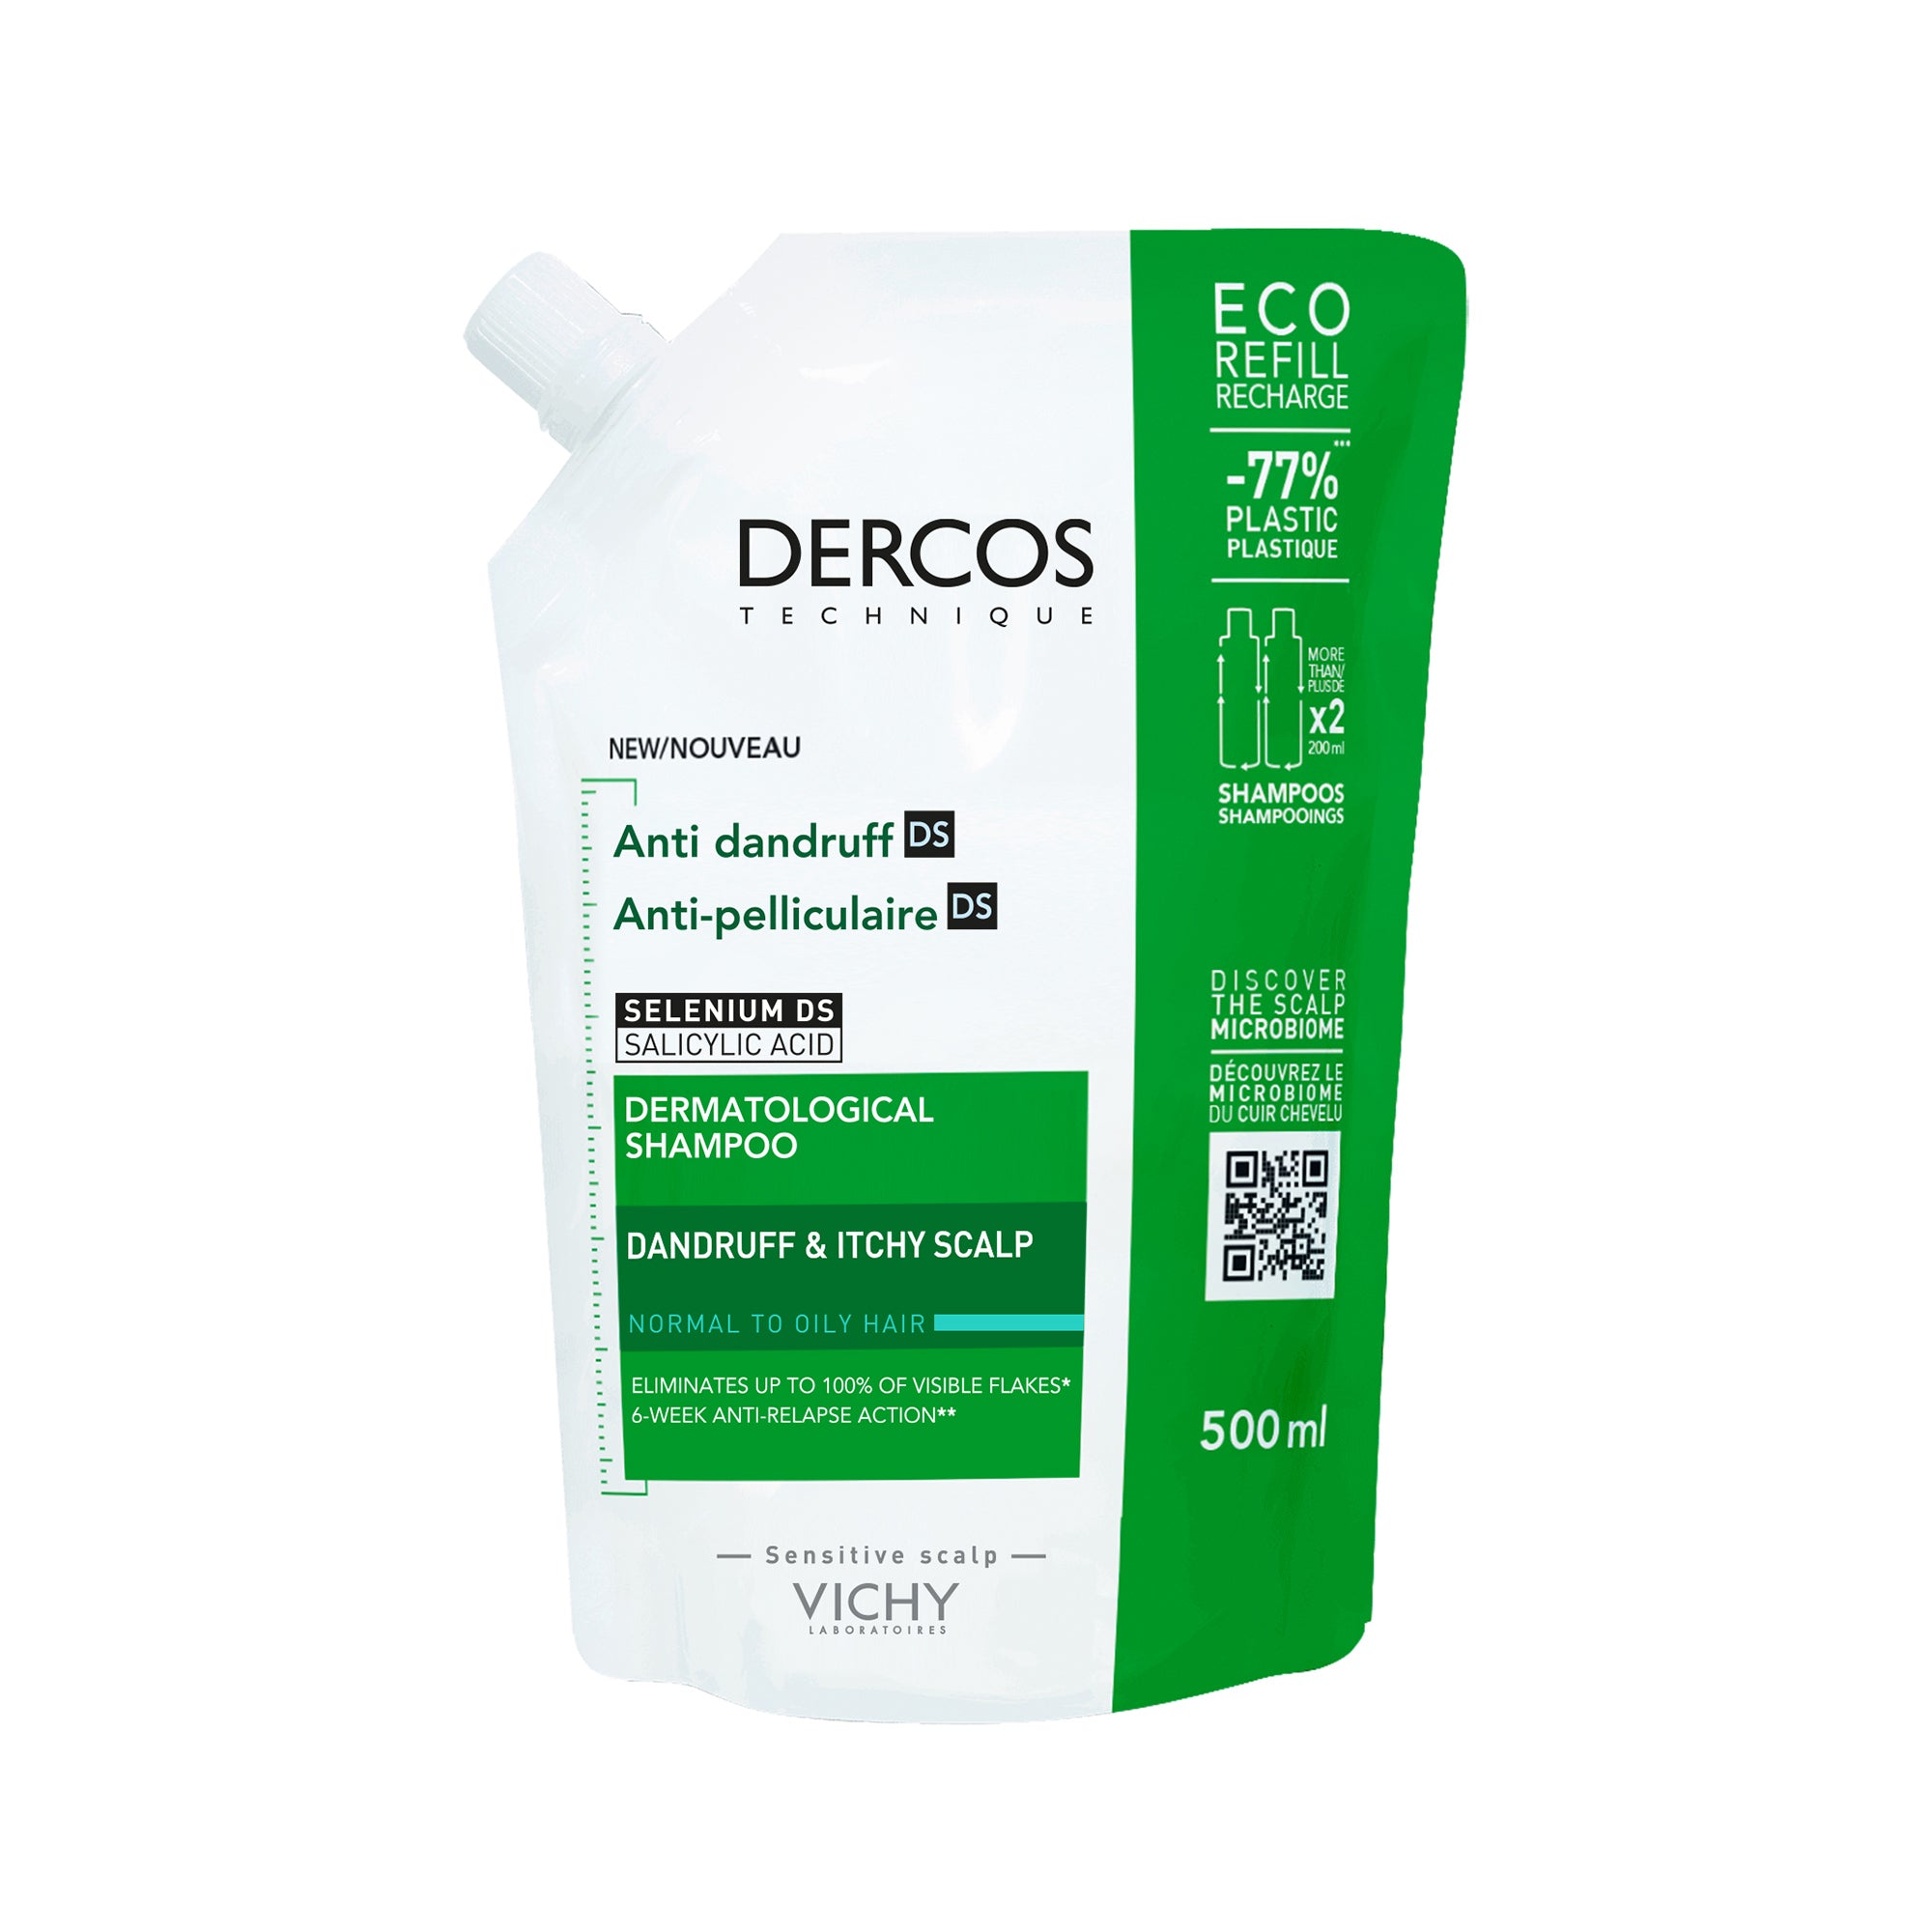 VICHY DERCOS TECHNIQUE ECO-RECHARGE SHAMPOOING ANTIPELLICULAIRE DS - CHEVEUX NORMAUX A GRAS 500ML